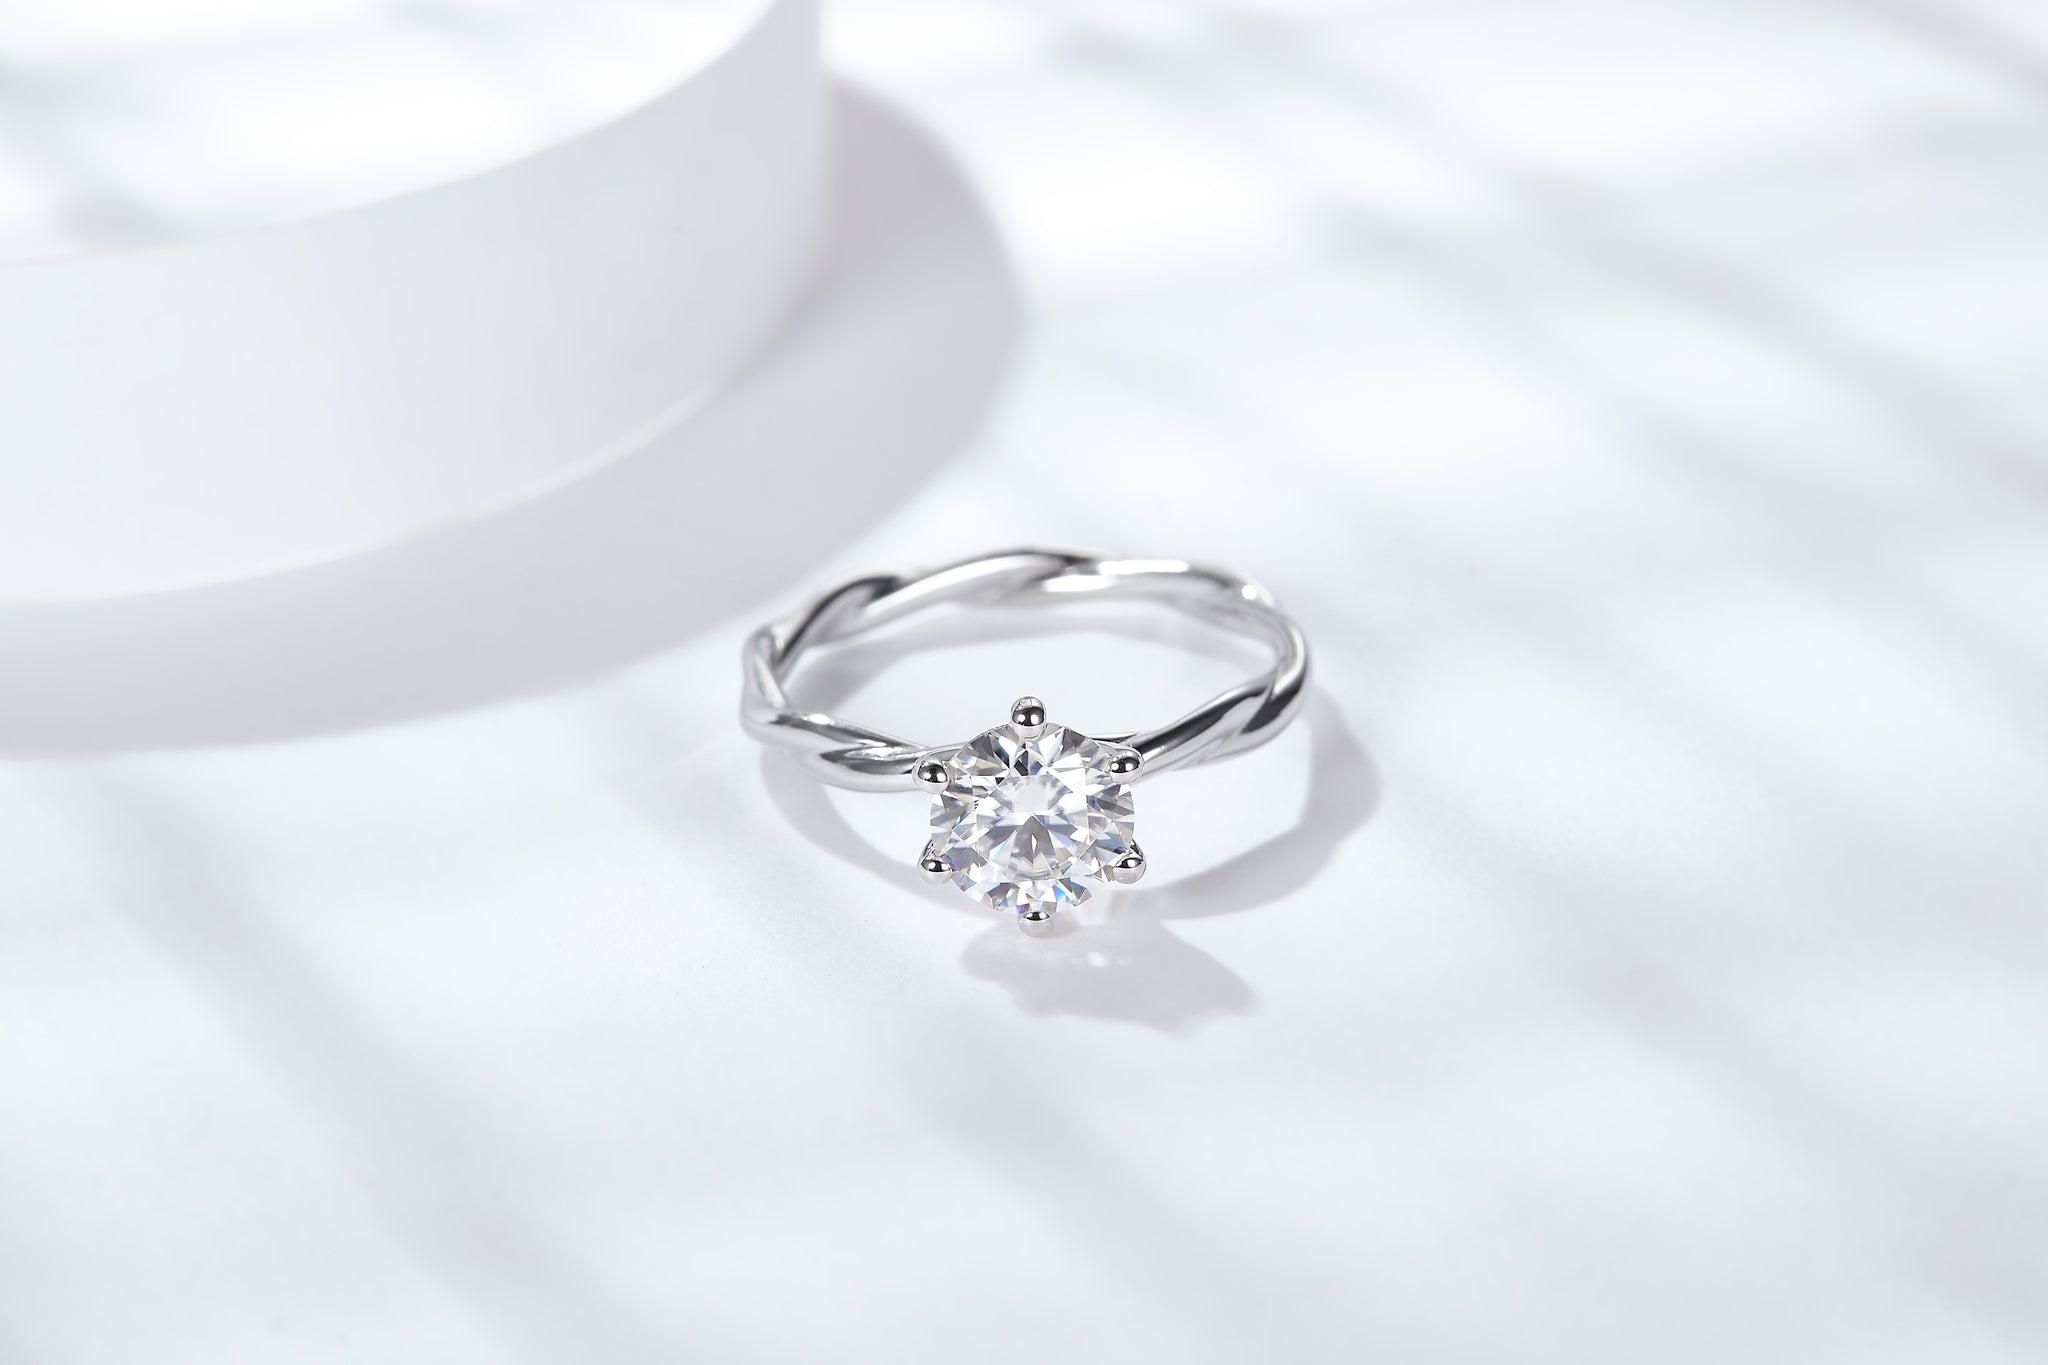 No.23  RM1017 1.0 CTW  Dainty Brilliant Round 6A Moissanite 18K S925 Band Ring  6 Prong for Wedding/Daily Twisted Vined Band